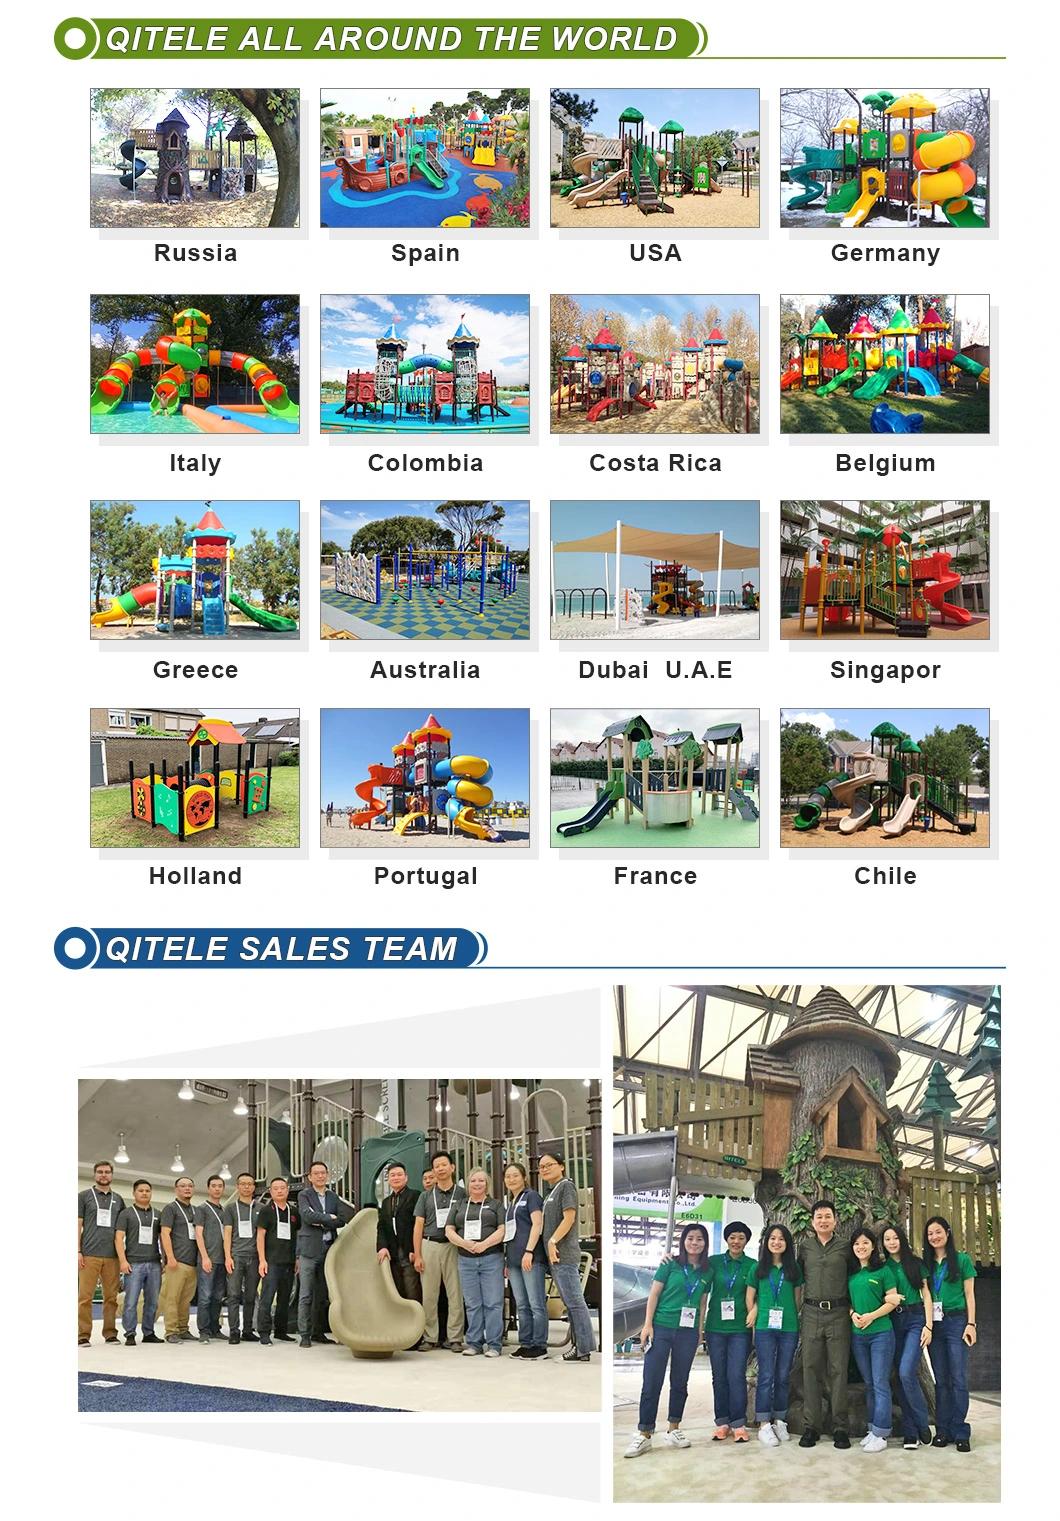 Used Commercial Playground Preschool Smelless Kids Outdoor Playground